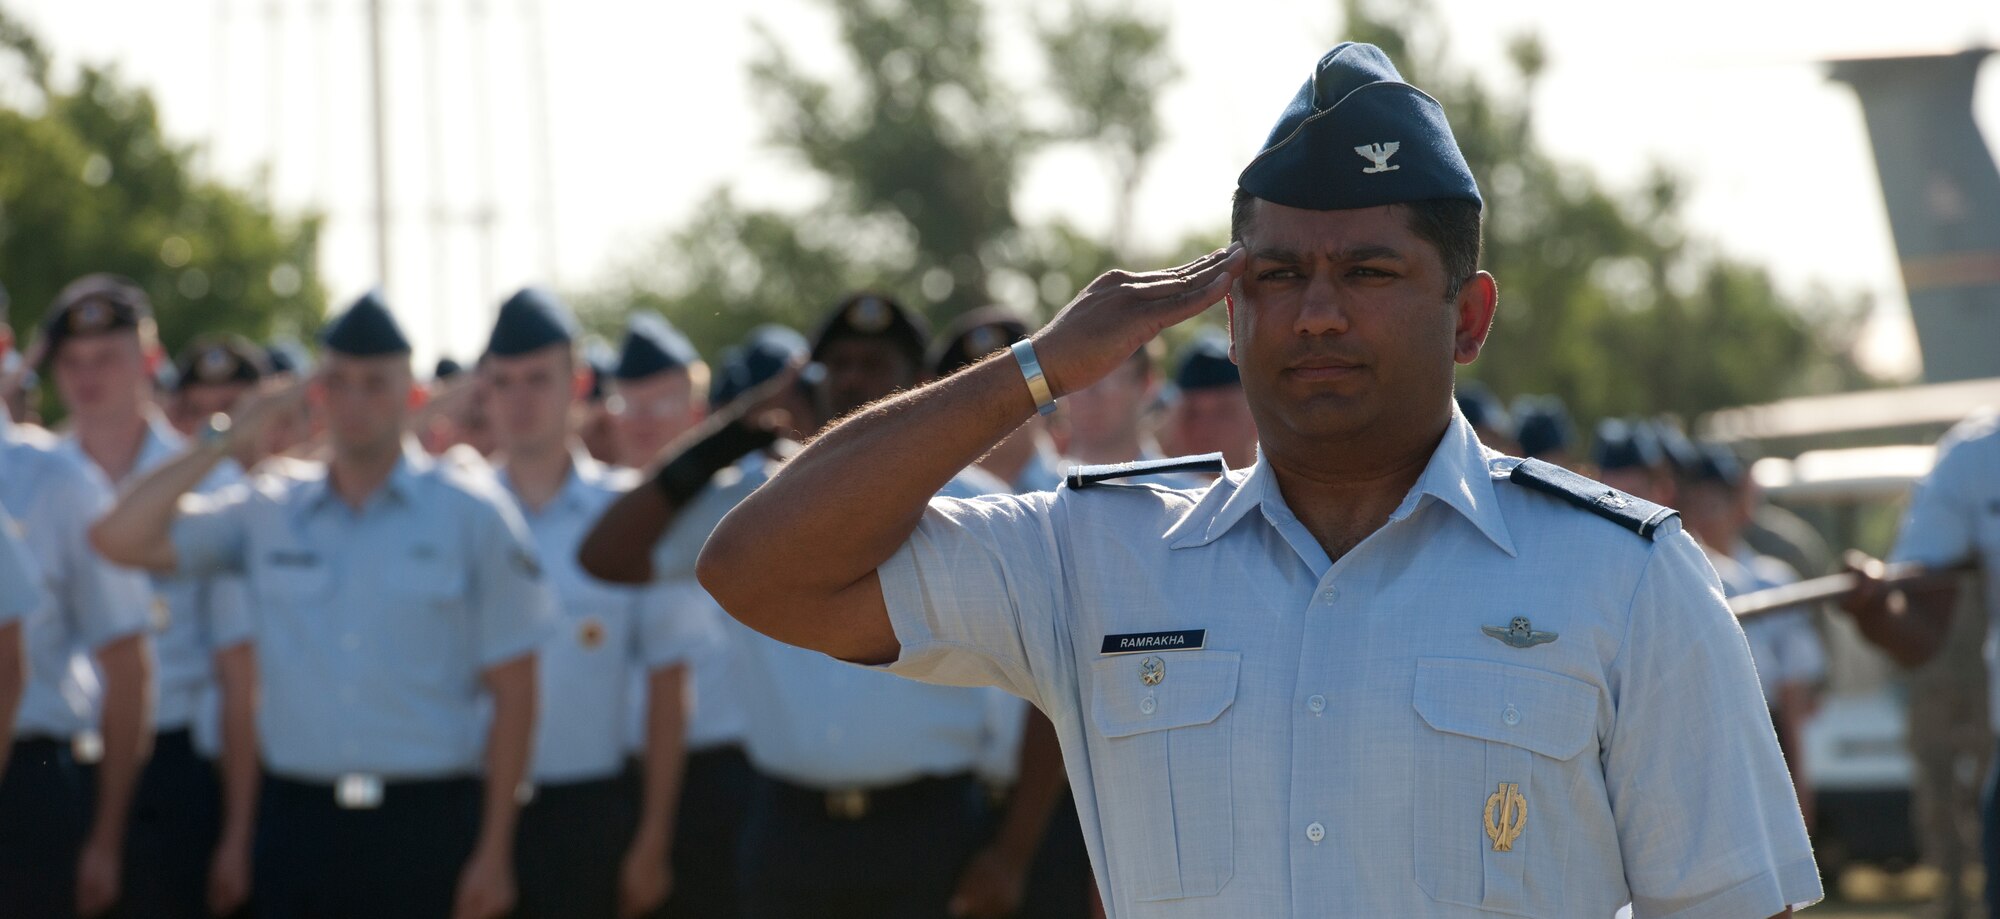 ALTUS AIR FORCE BASE, Okla. – Col. Sushil Ramrakha, 97th Air Mobility Wing vice commander, salutes during the playing of the colors as part of the 97th AMW change of command ceremony at Wings of Freedom Park, June 27. Ramrakha served as the Commander of Airmen as Col. Anthony B. Krawietz, 97th AMW commander, relinquished command to Col. William A. Spangenthal, incoming 97th AMW commander. (U.S. Air Force photo by Senior Airman Jesse Lopez / Released)